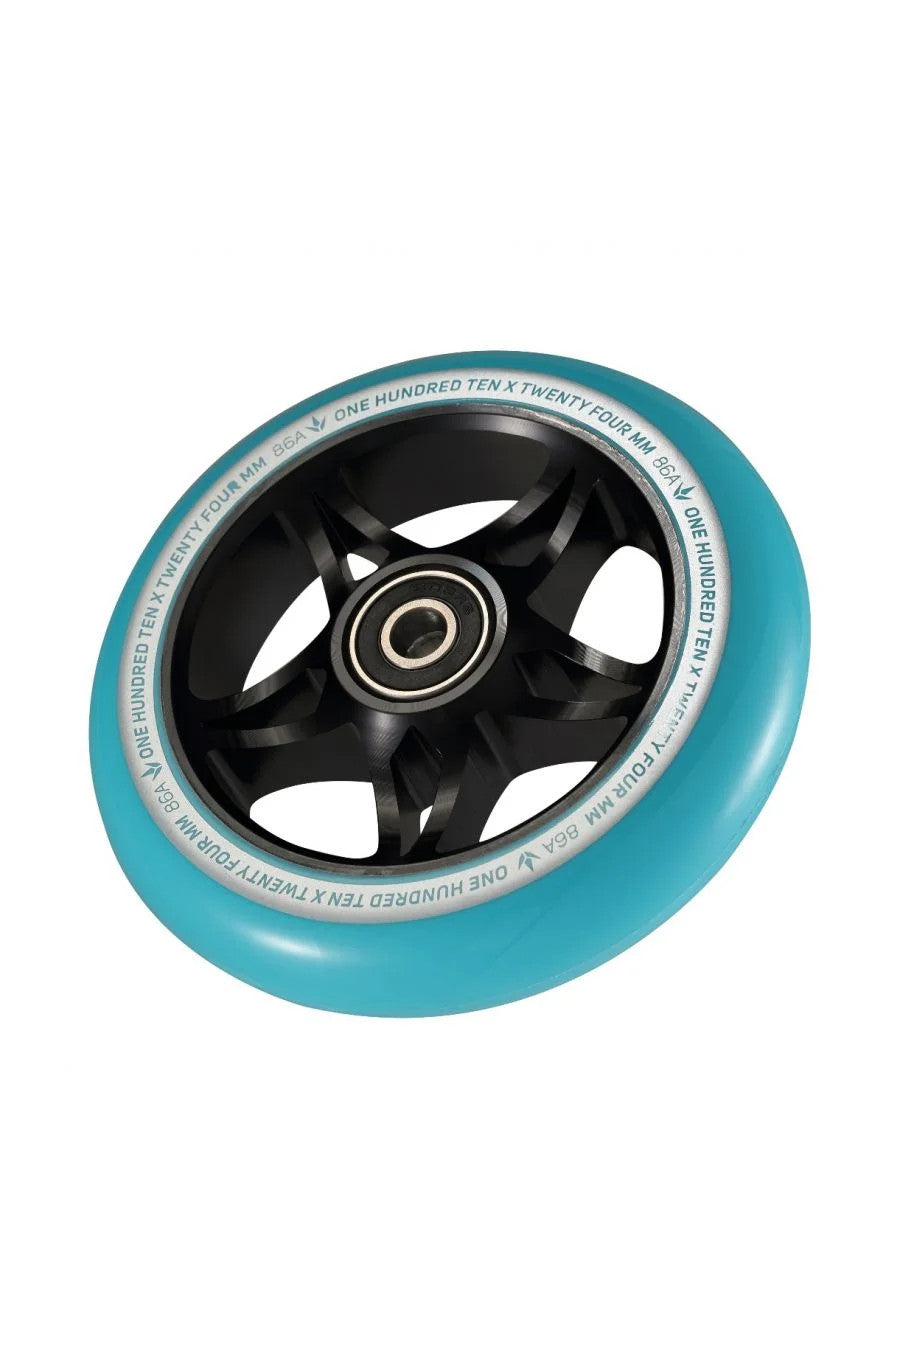 Envy S3 110mm (PAIR) - Scooter Wheels Black Teal Angle View